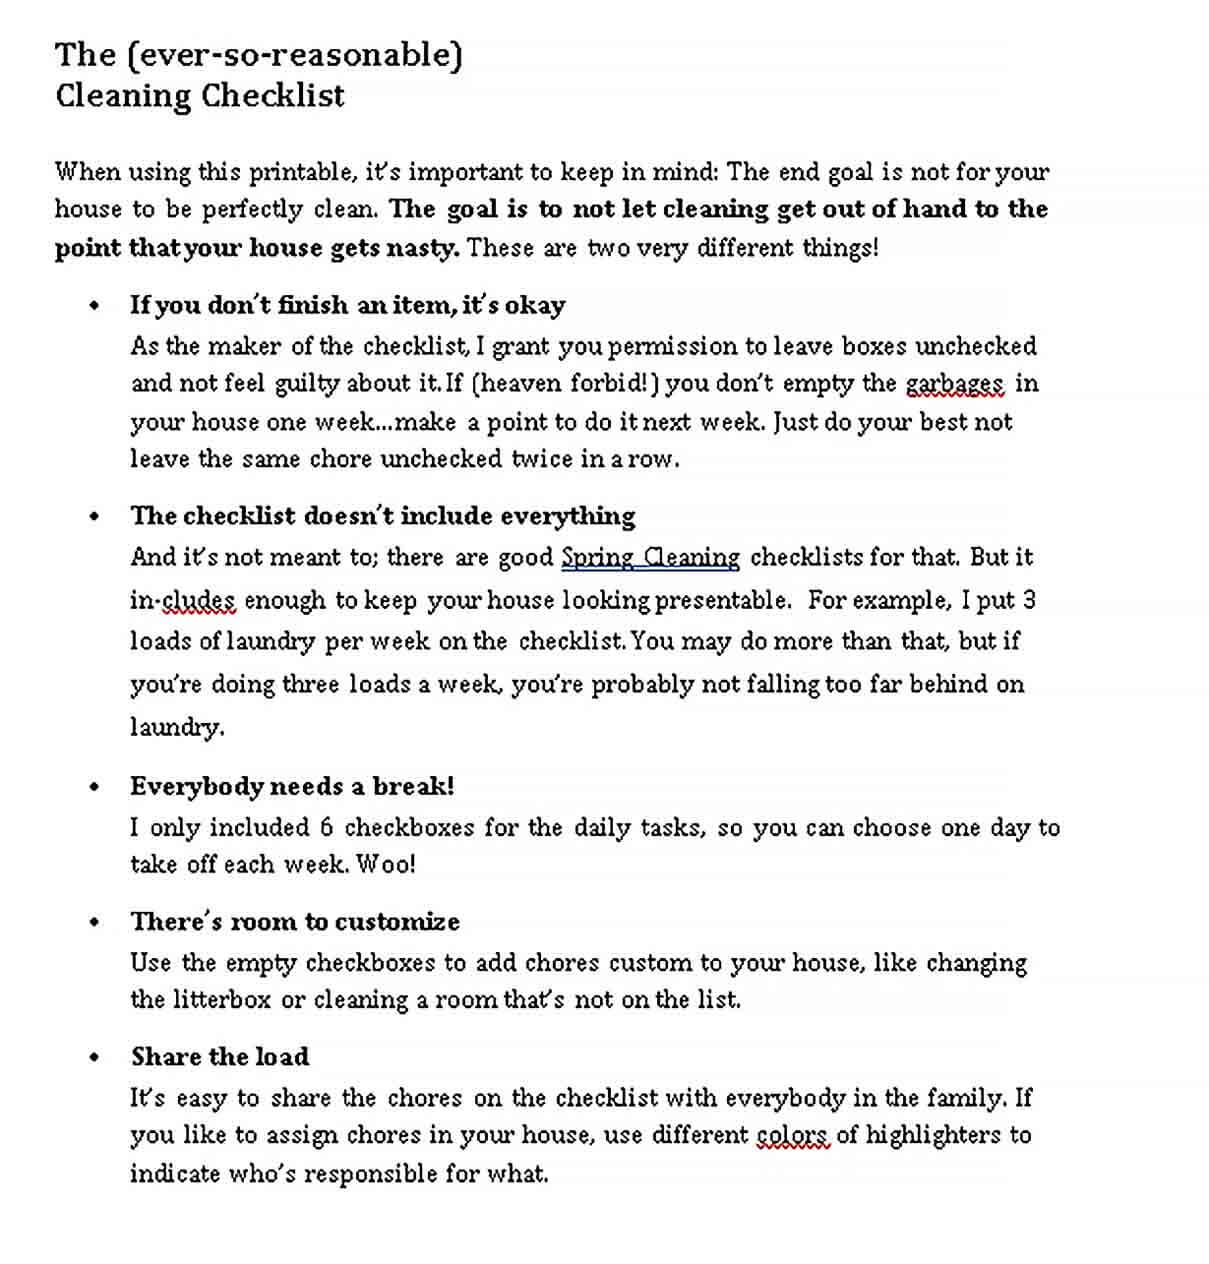 Sample PDF Format of Cleaning Checklist